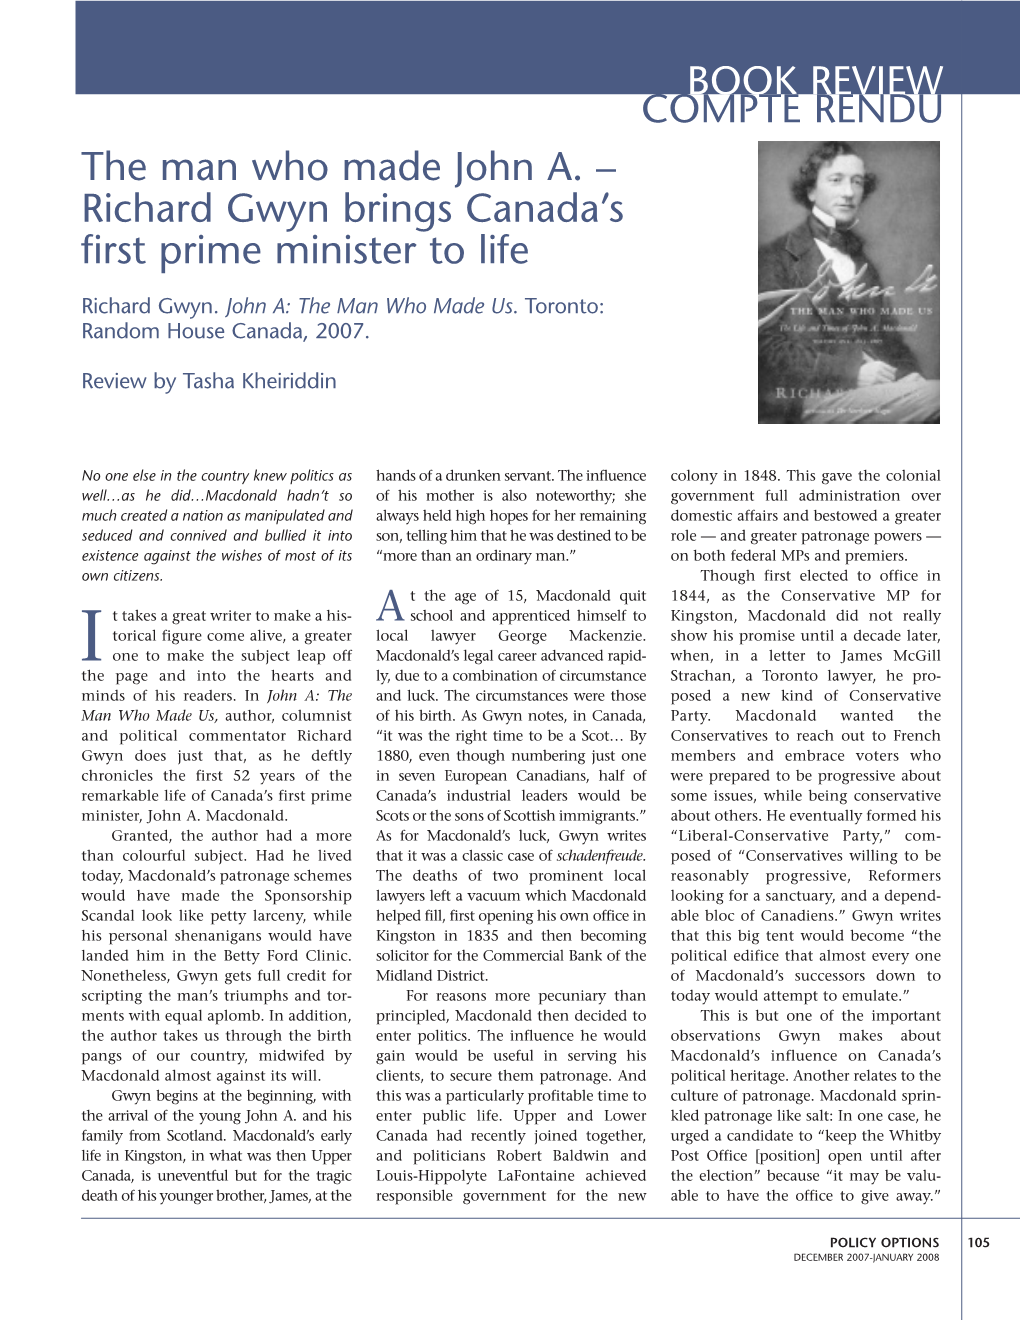 Richard Gwyn Brings Canada's First Prime Minister to Life